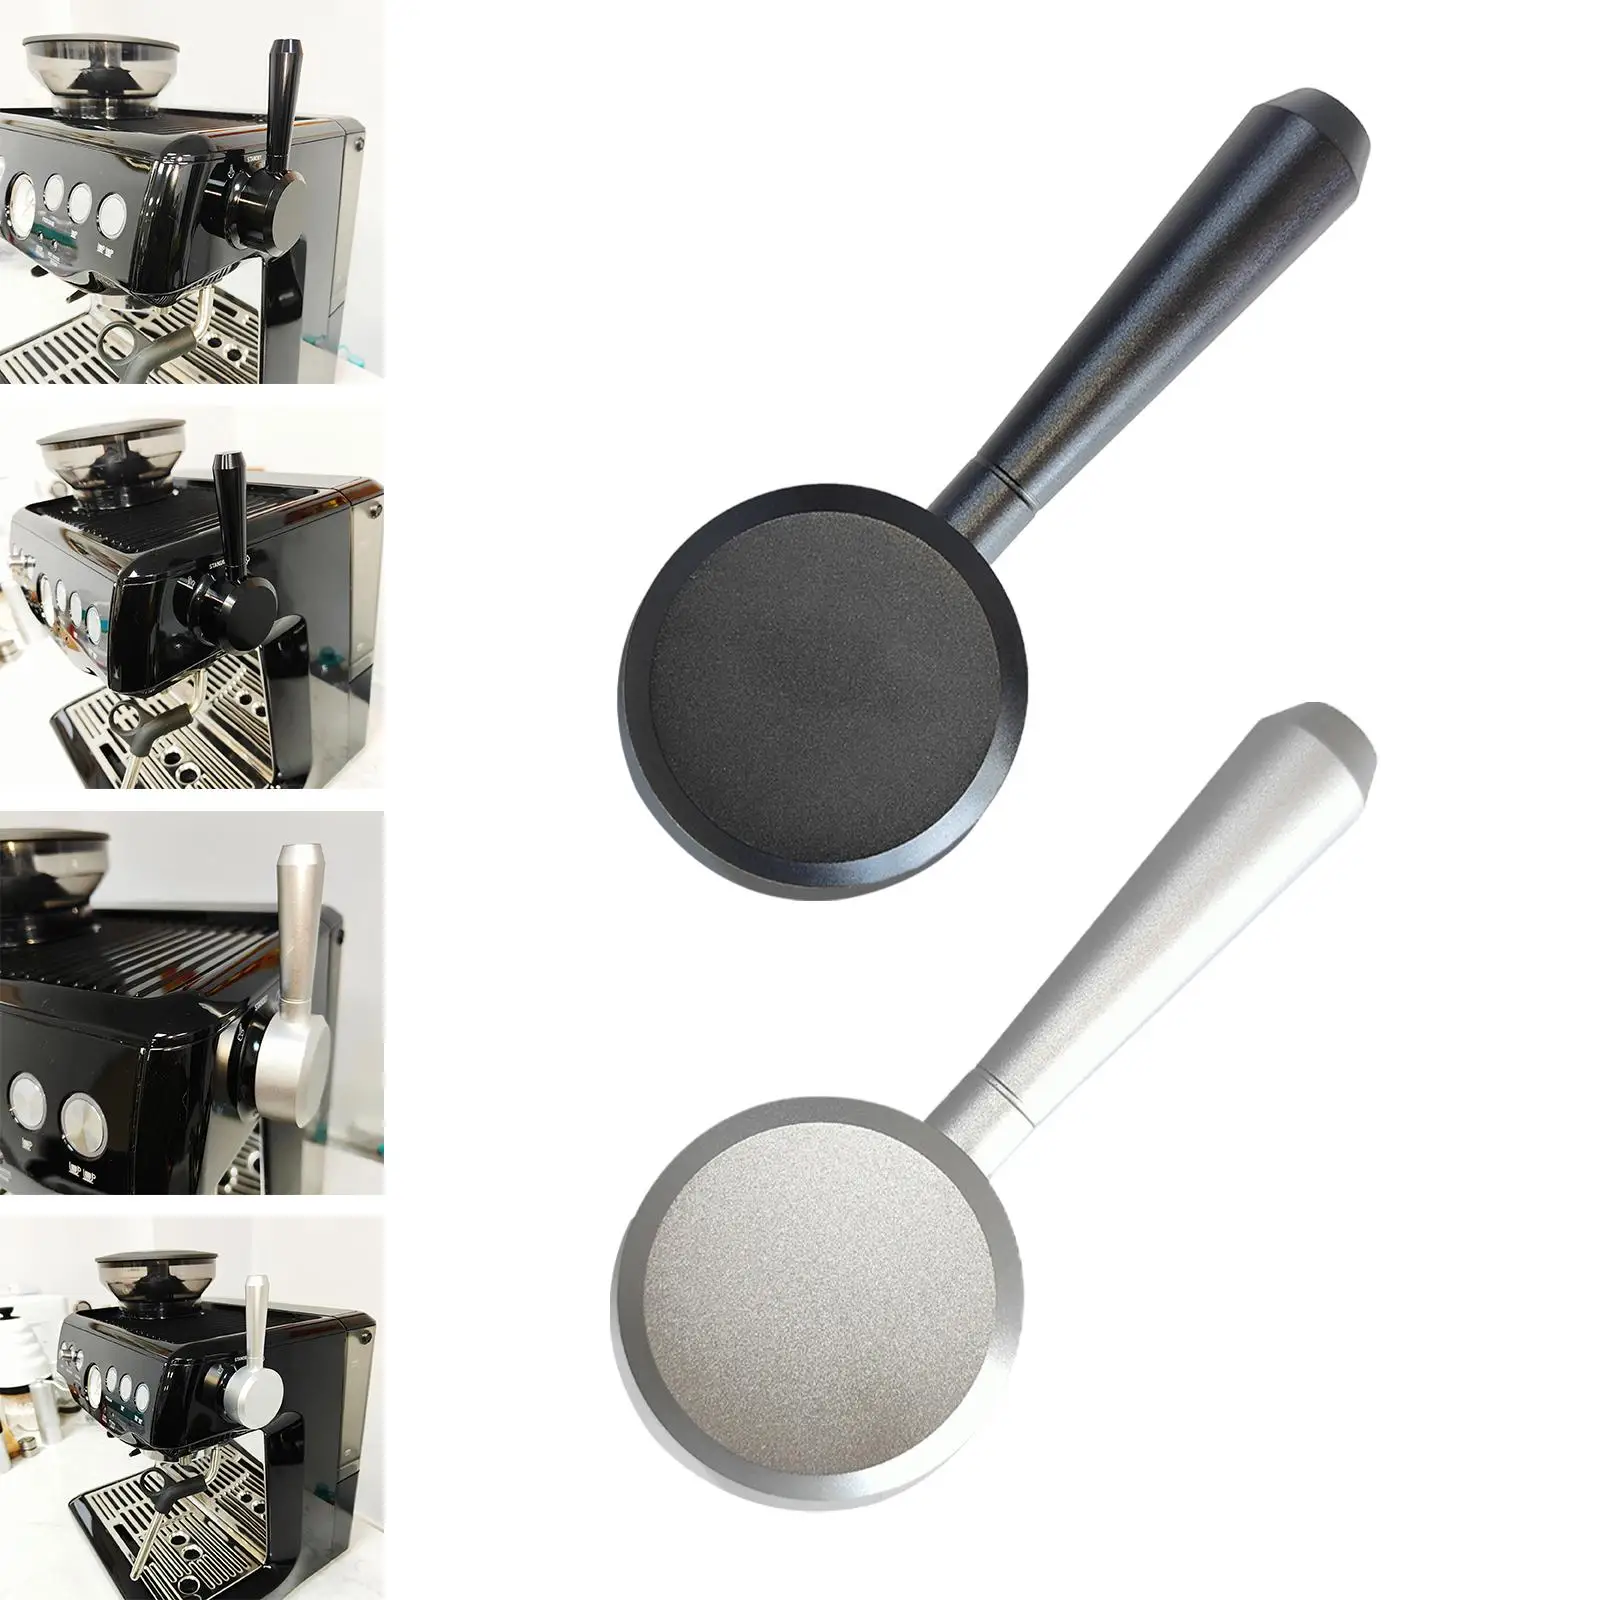 Replacements Steam Lever Kitchen Tools Portable for 870 876 Coffee Machine Barista Gift